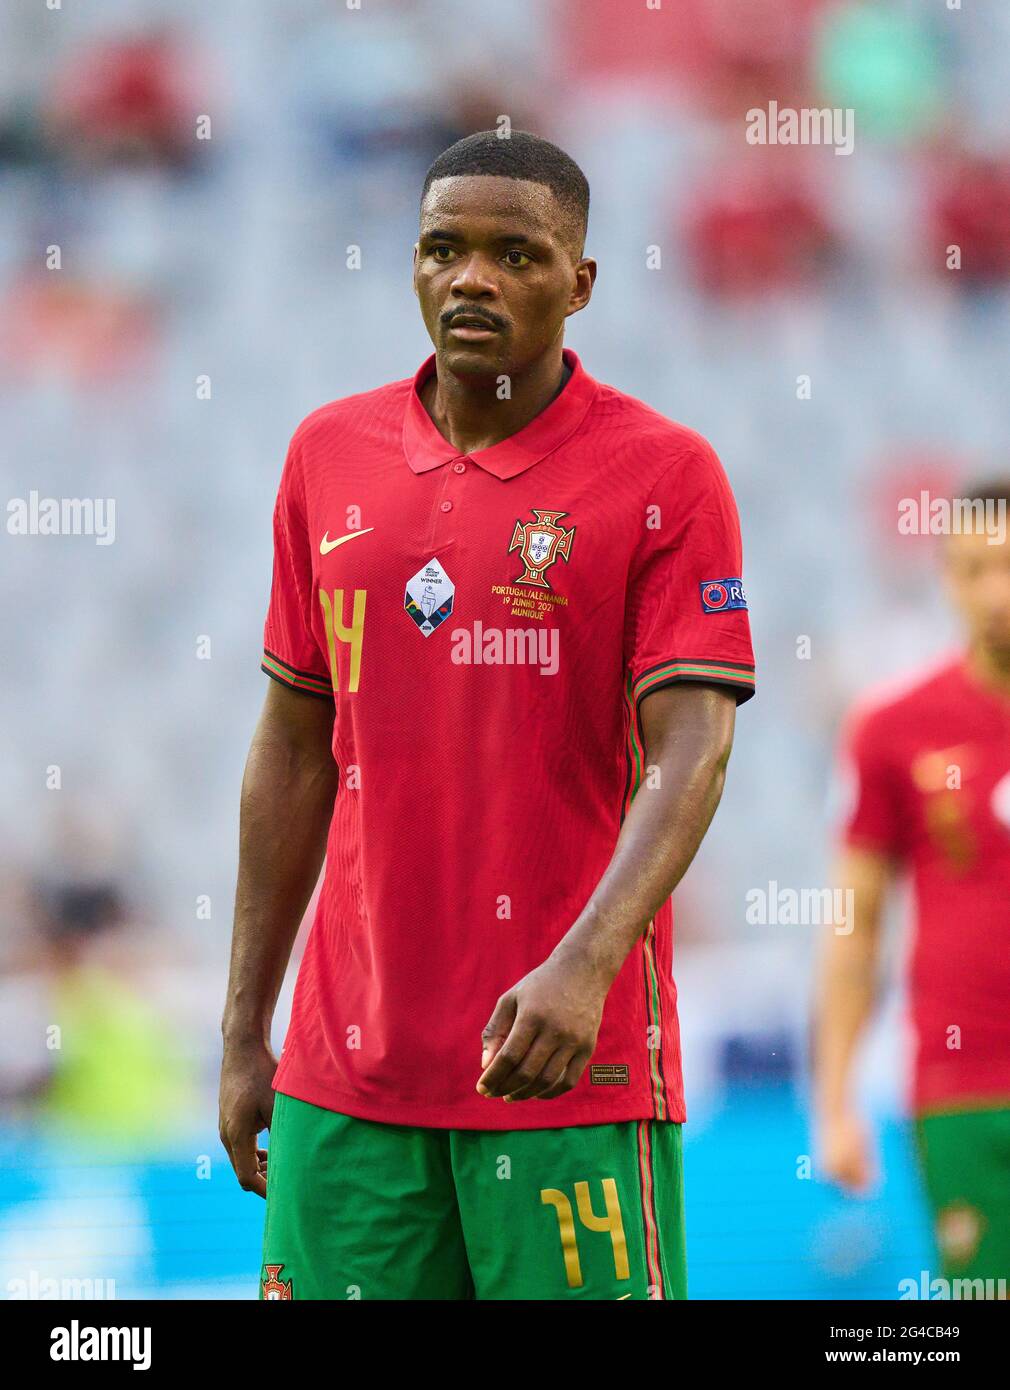 Munich, Germany. 19th June, 2021. William CARVALHO, Por 14  in the Group F match PORTUGAL - GERMANY 2-4  at the football UEFA European Championships 2020 in Season 2020/2021 on June 19, 2021  in Munich, Germany. © Peter Schatz / Alamy Live News Stock Photo